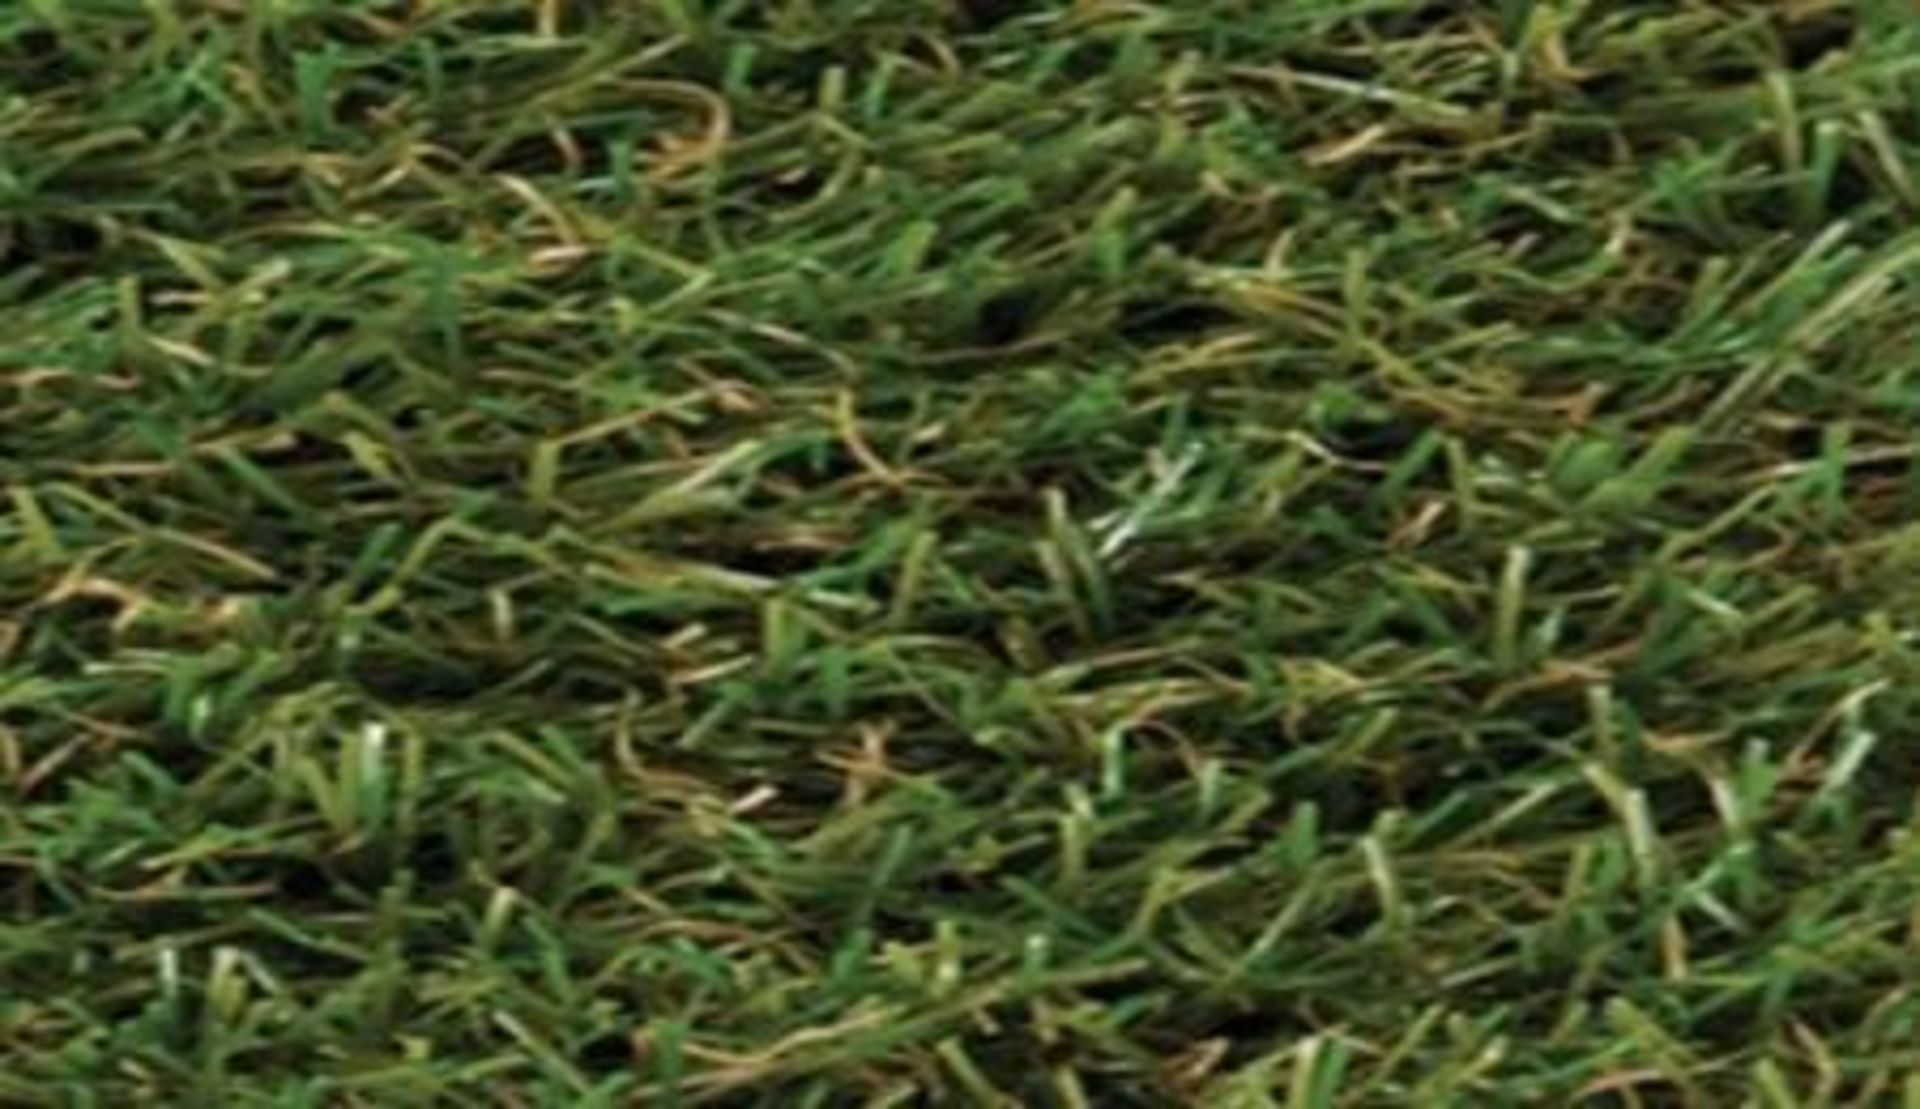 25m x 4m total Heavy-Duty G5 35mm on a 2mm Width Artificial Grass - Image 3 of 3